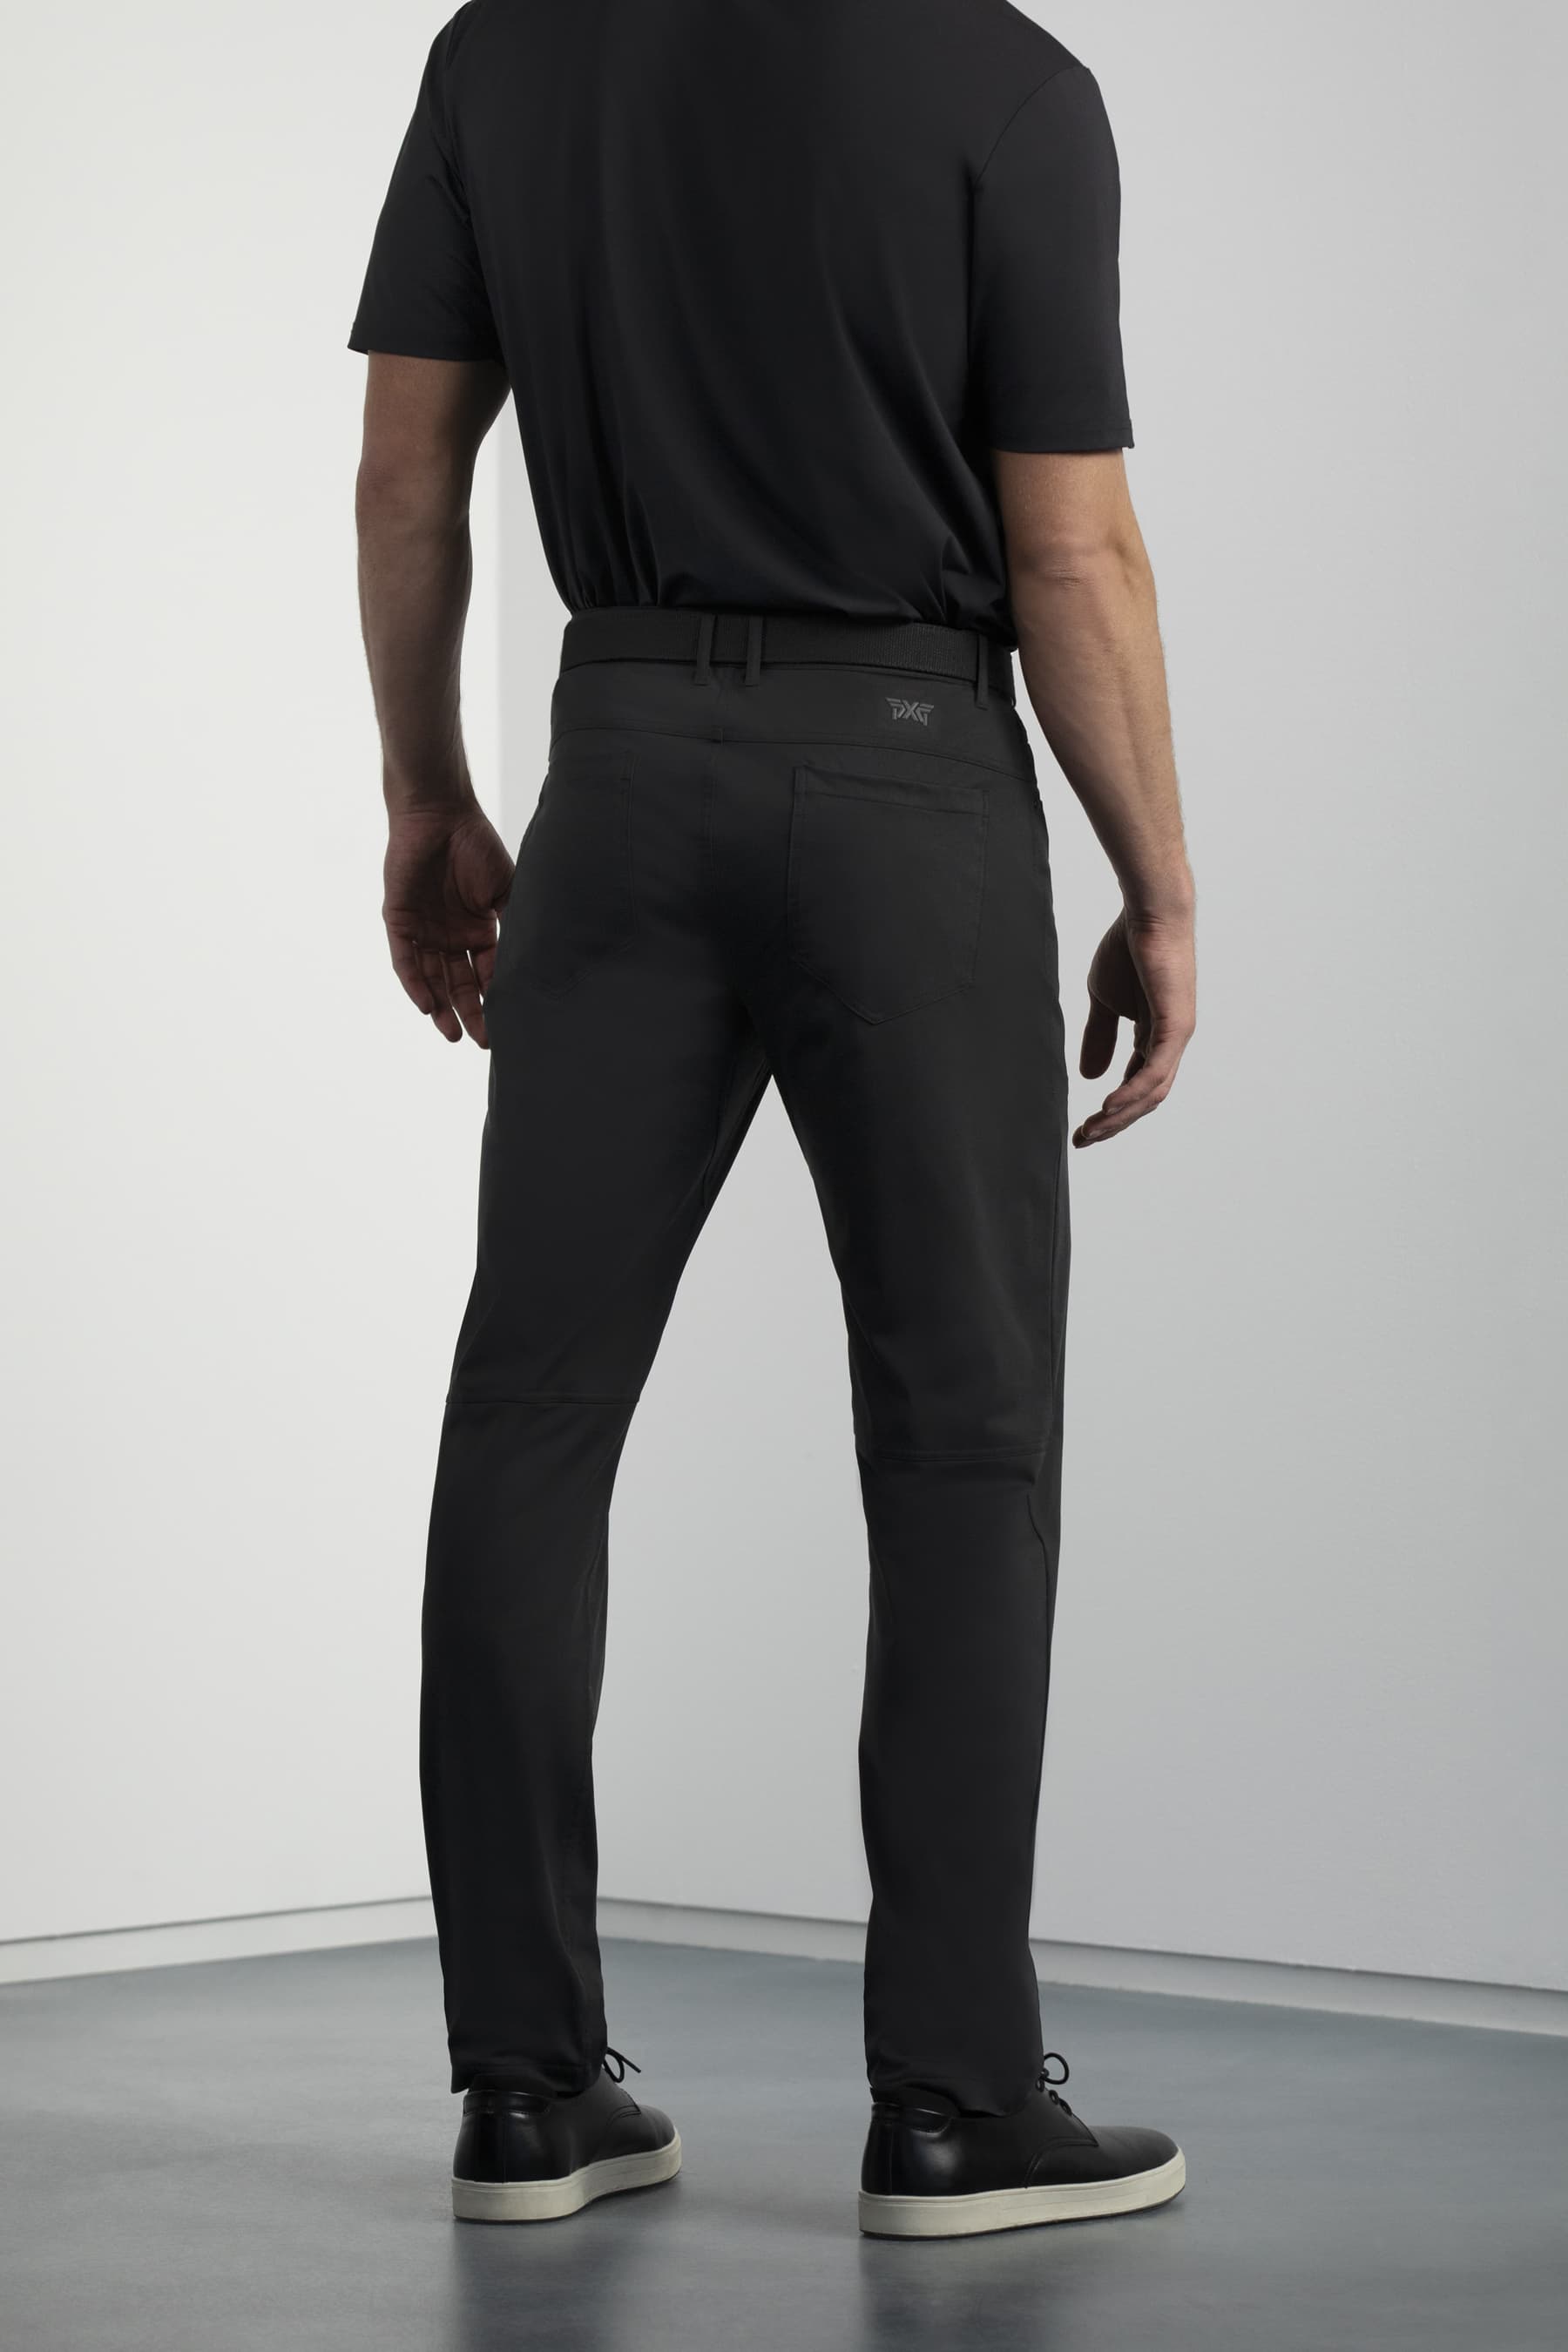 Essential Golf Pants  Shop the Highest Quality Golf Apparel Gear  Accessories and Golf Clubs at PXG